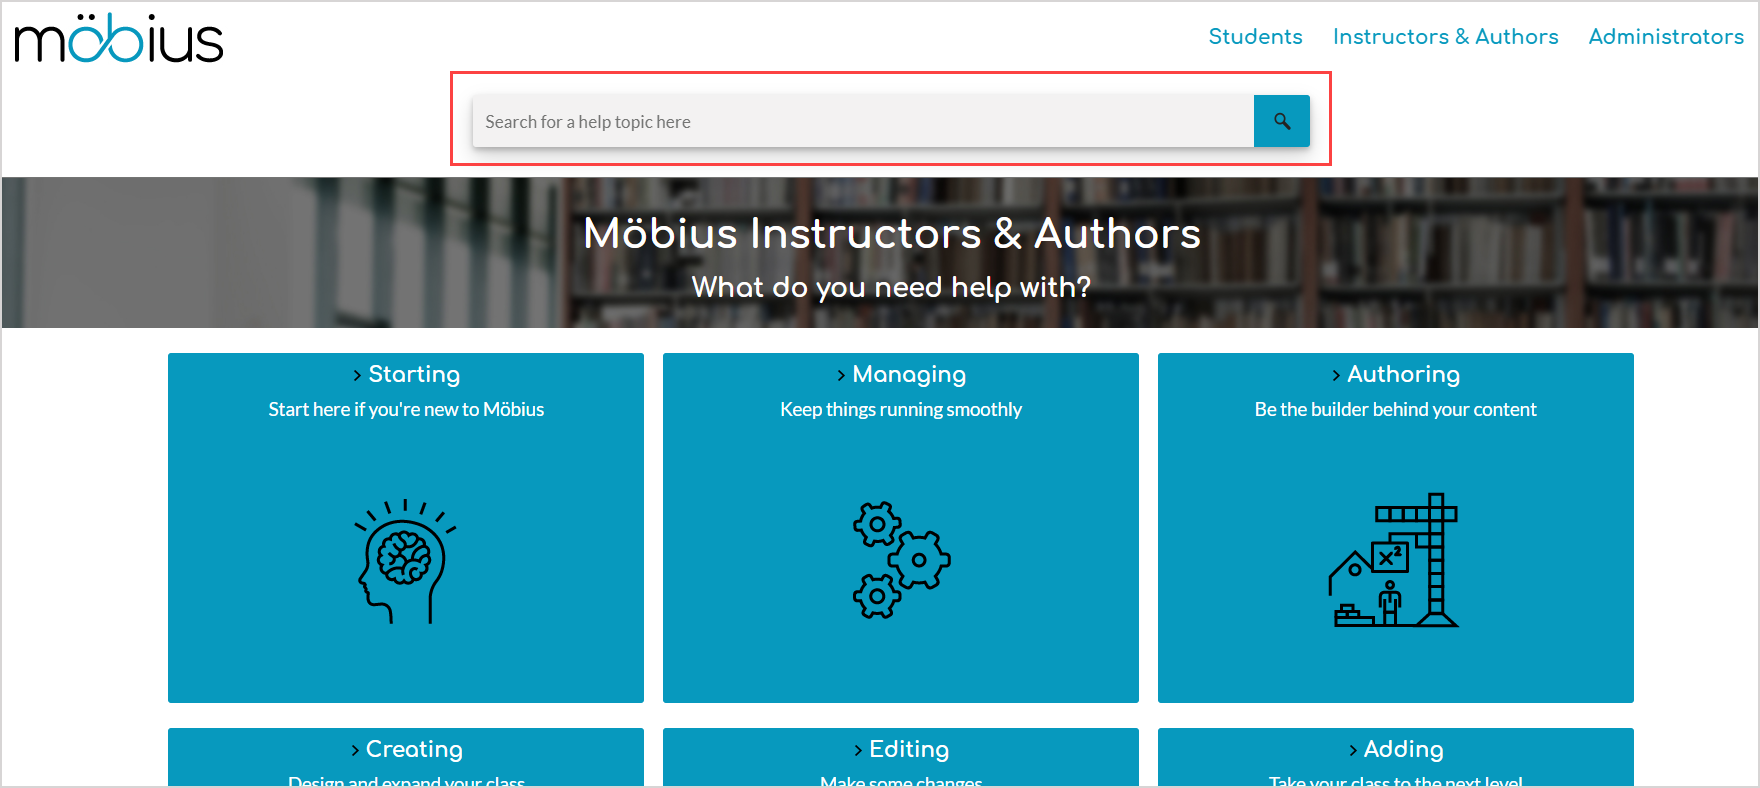 There's a search bar at the top of the Mobius Instructor Online Help page.